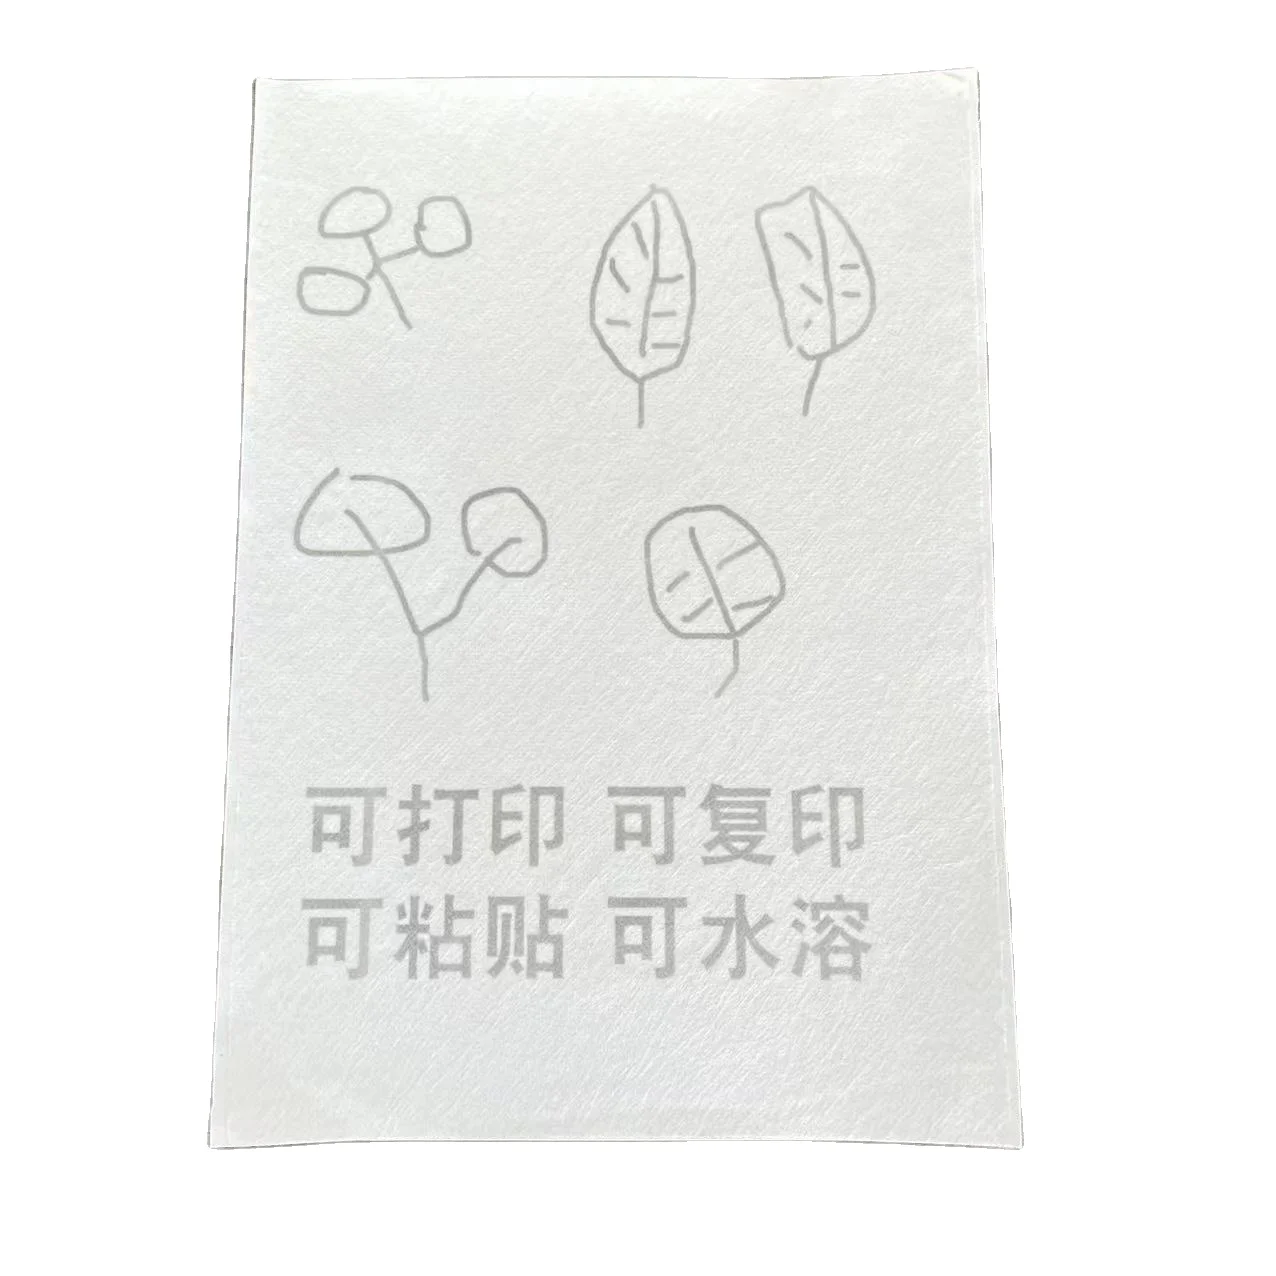 

New Arrival 100% dissolve PVA non-woven fabric with PVA glue used as water soluble embroidery backing stabilizer